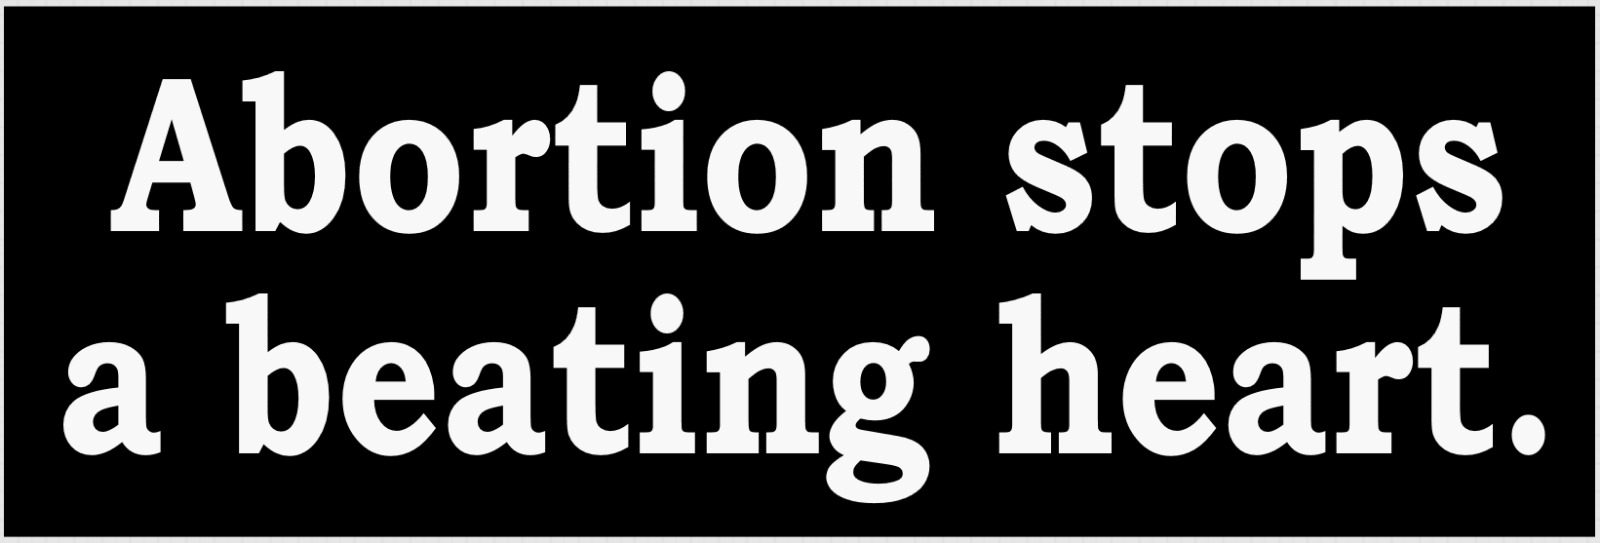 PRO-LIFE BUMPER STICKER ABORTION STOPS A BEATING HEART ANTI-ABORTION REPUBLICAN